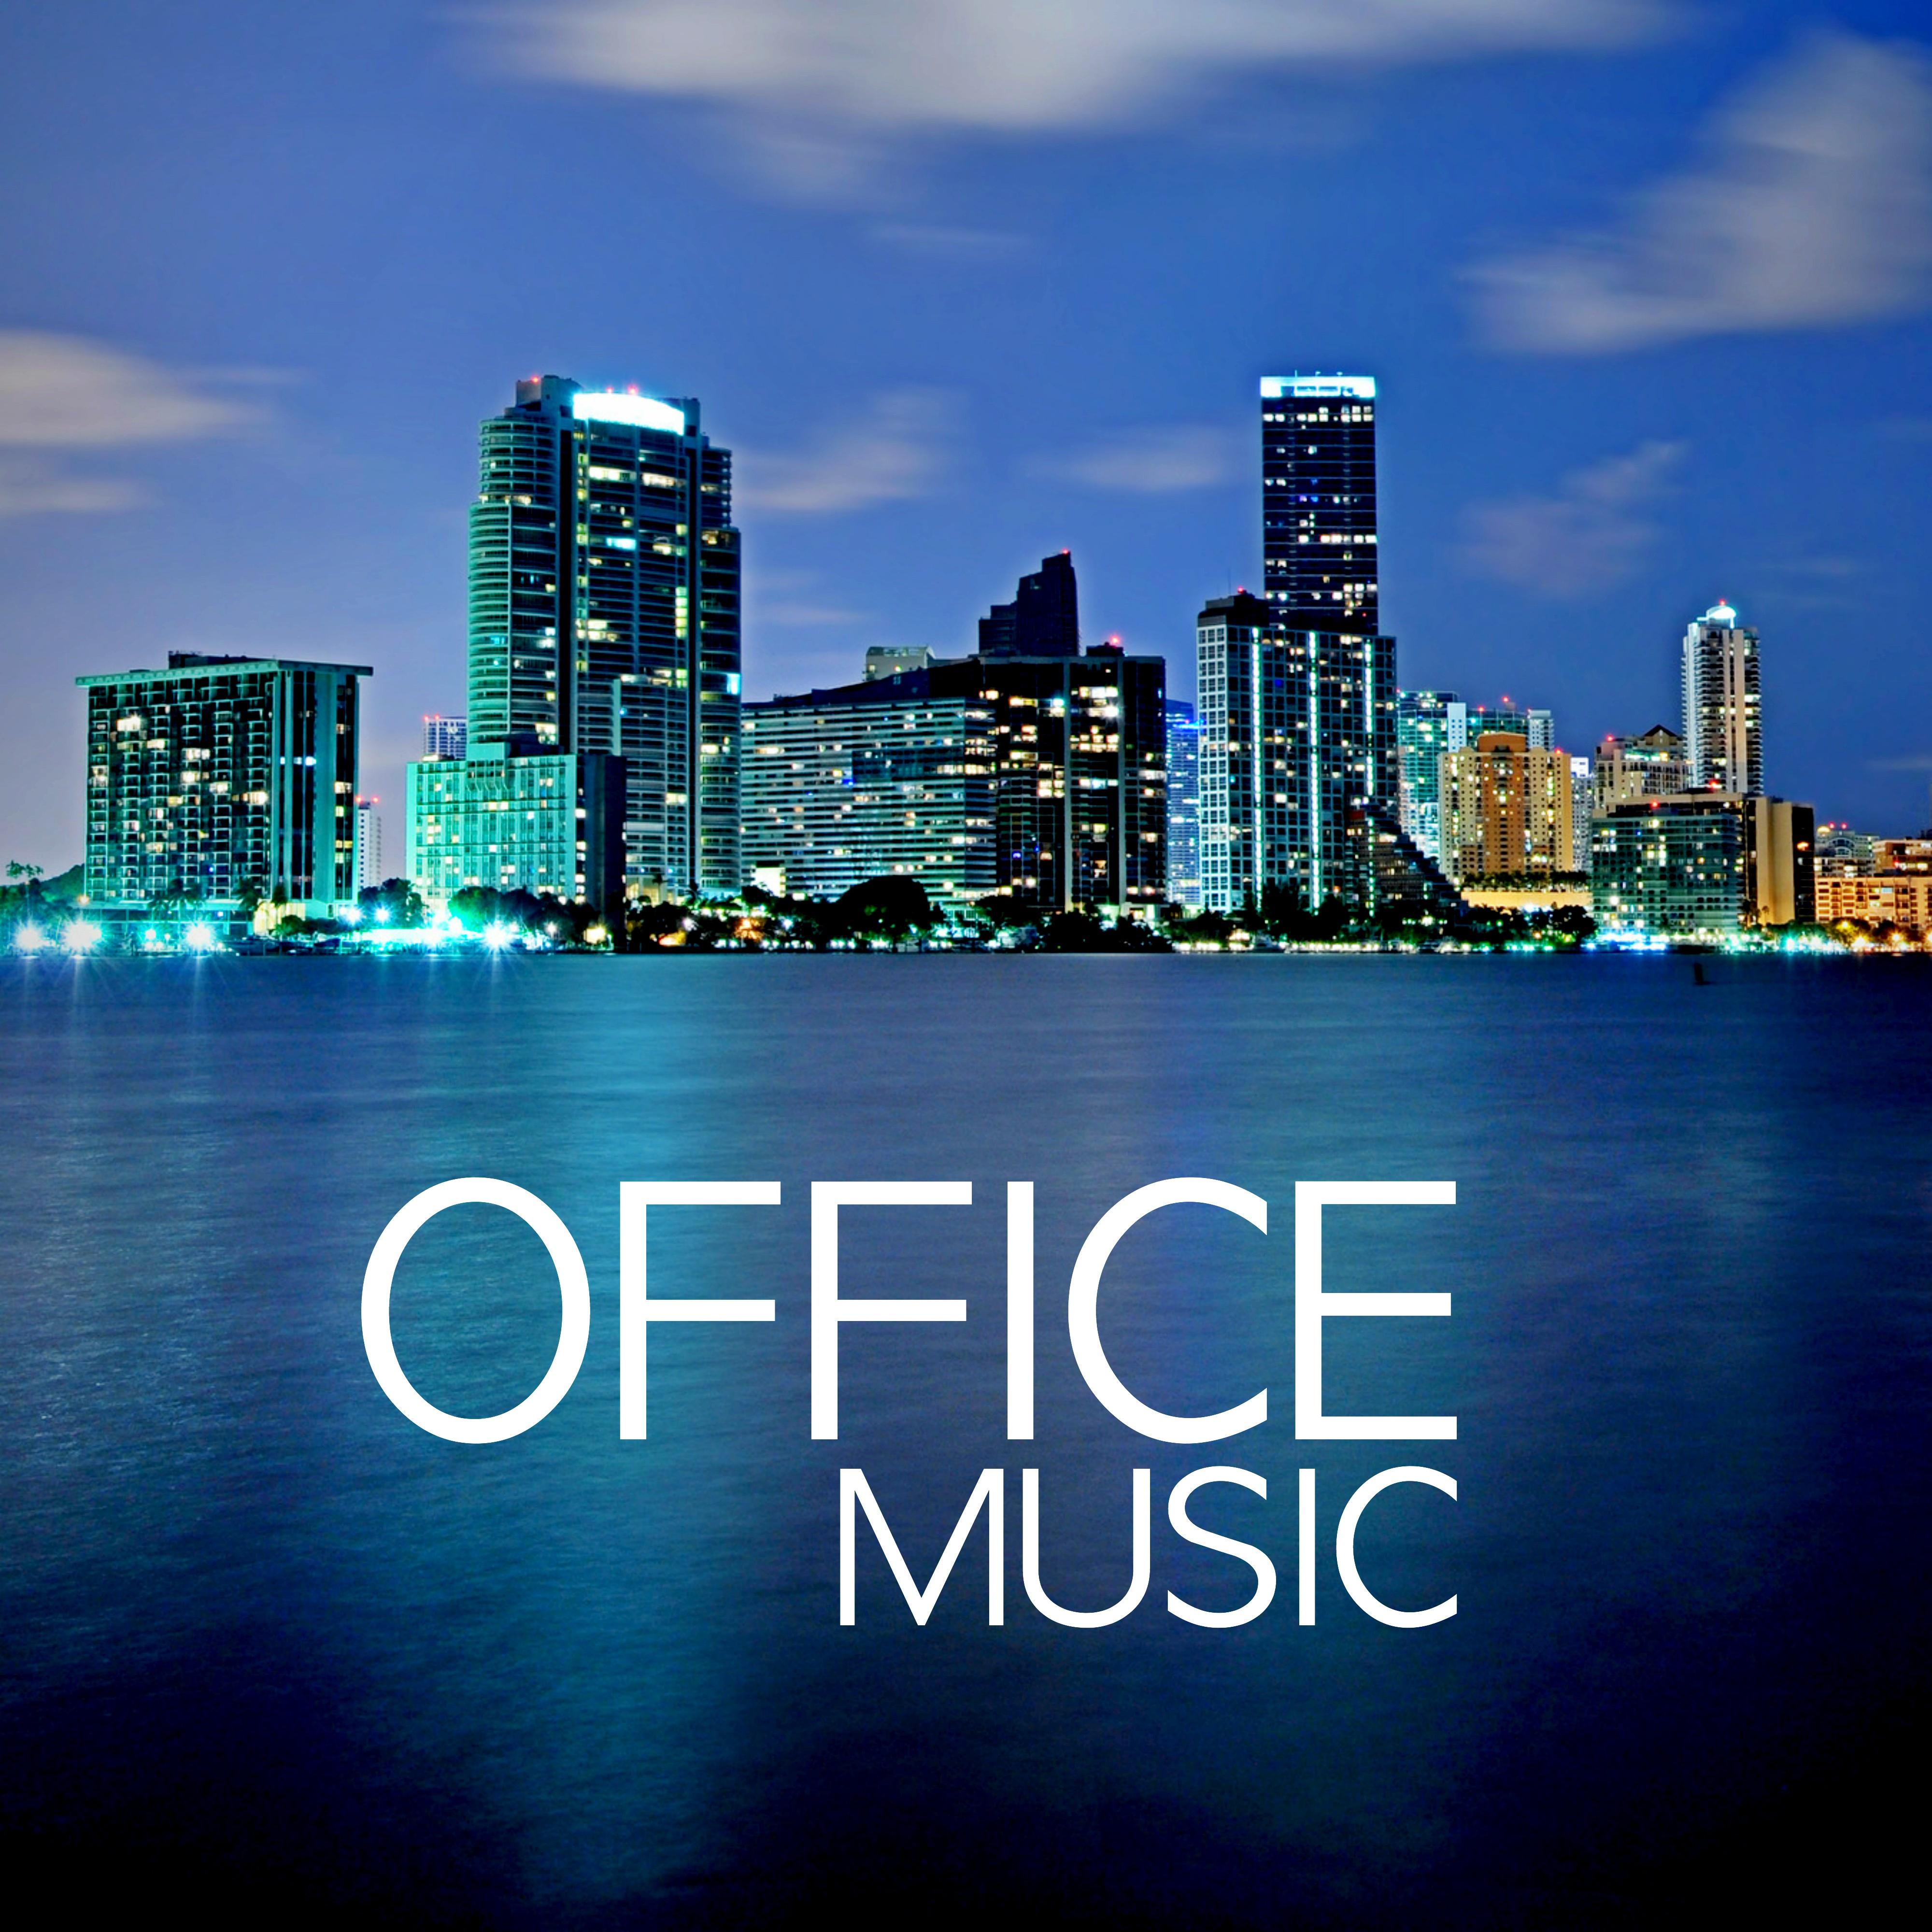 Office Music Playlist - Bossanova Jazz Music to Focus on Work and Stay Concentrated